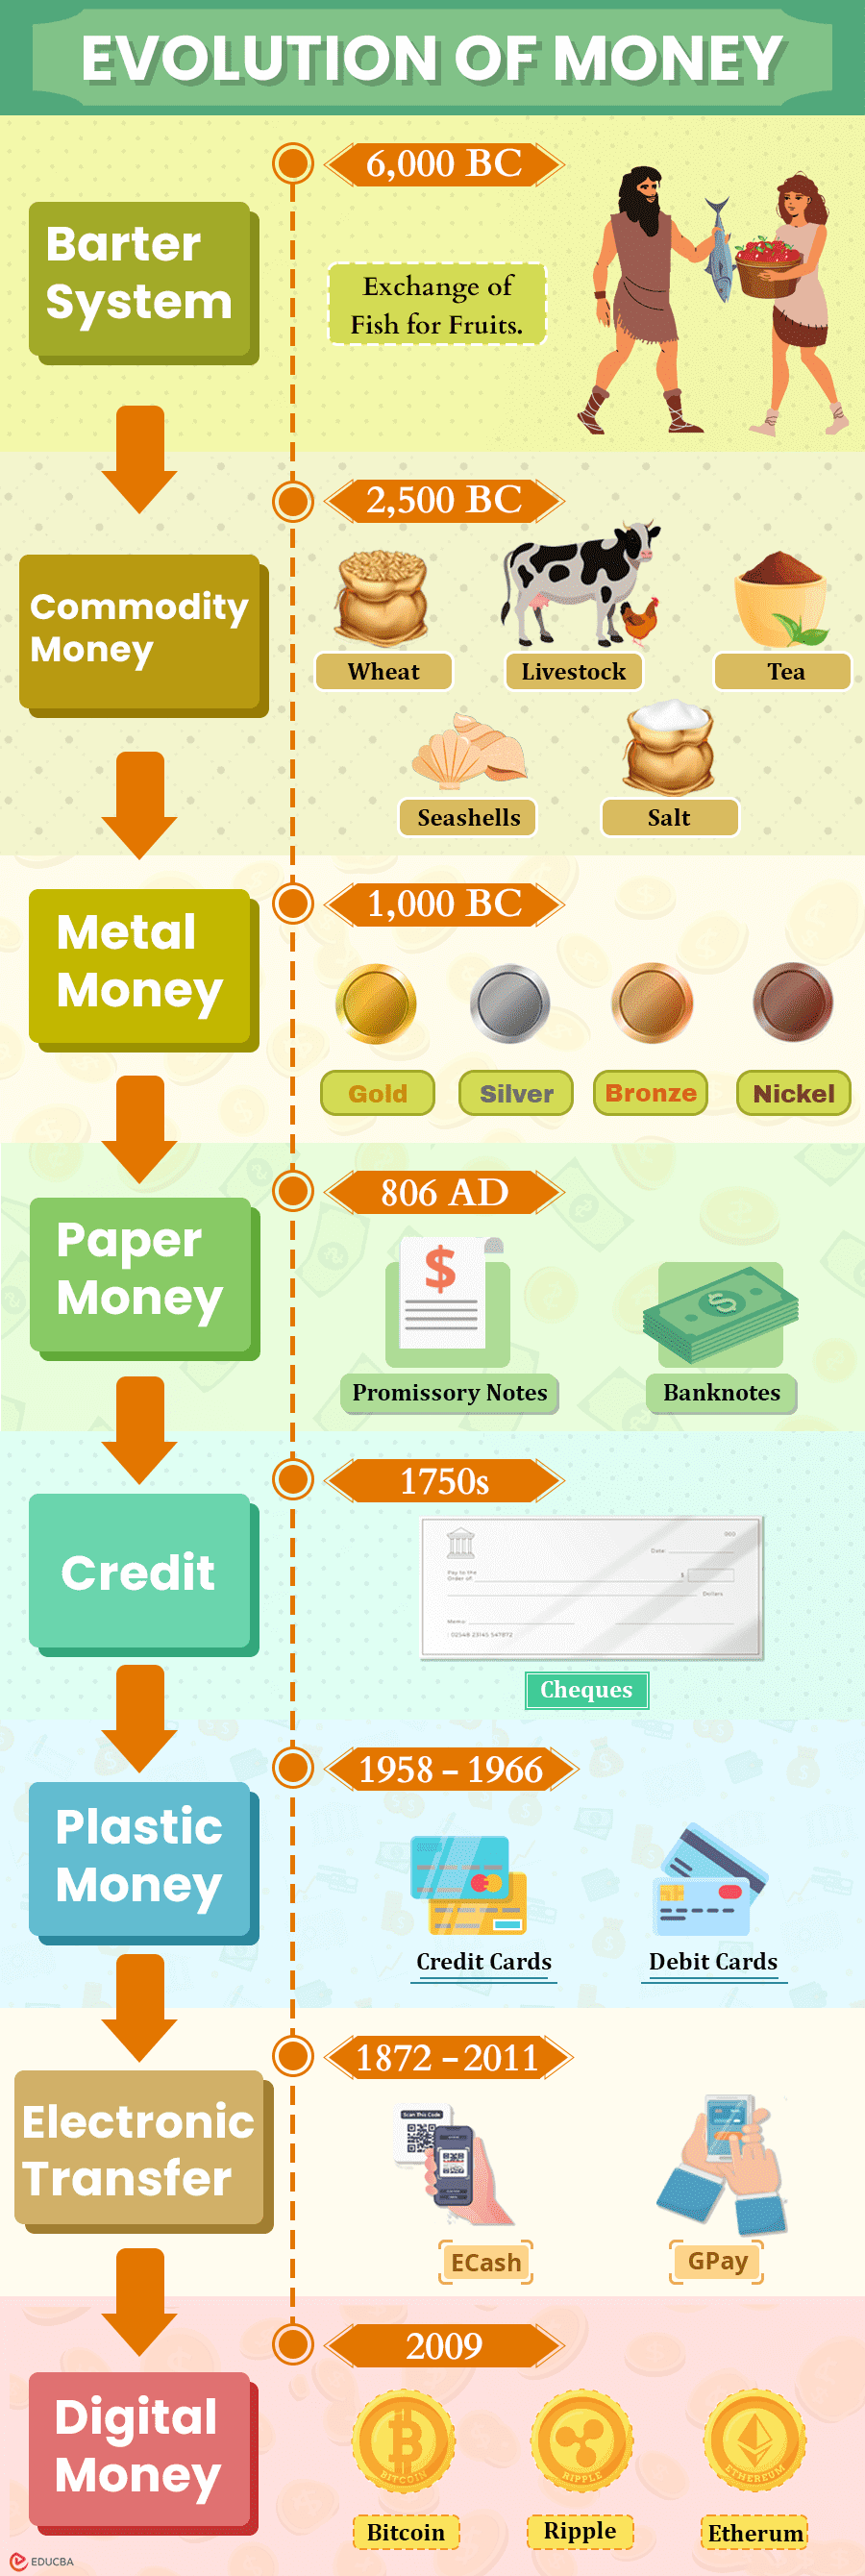 Evolution of Money Infographic: Timeline + Examples